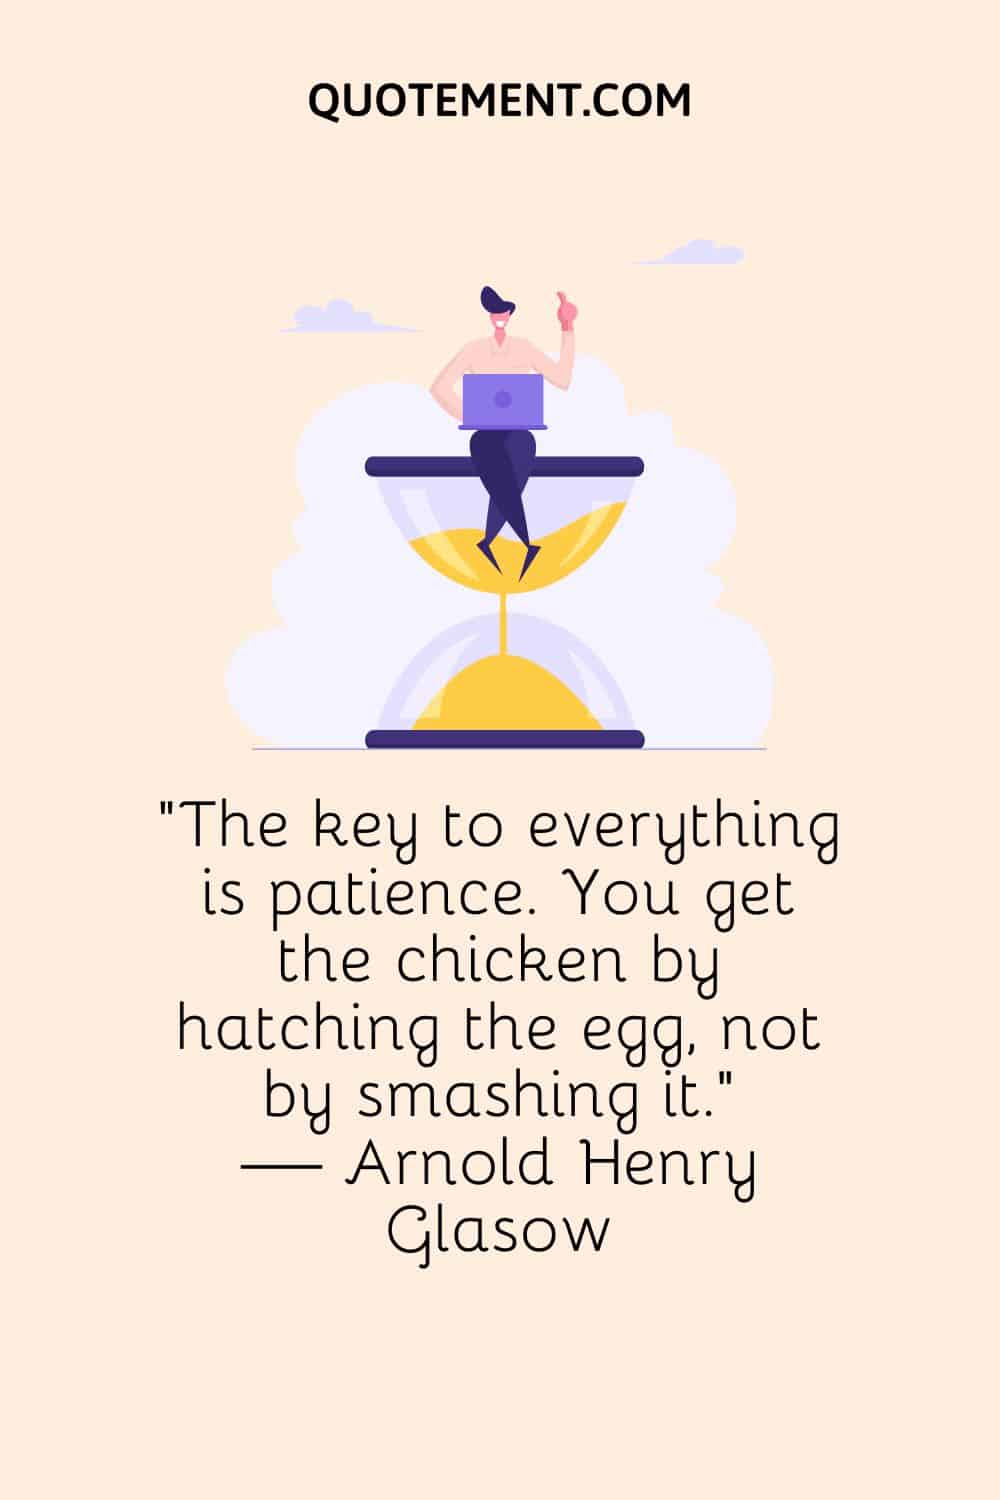 The key to everything is patience. You get the chicken by hatching the egg, not by smashing it